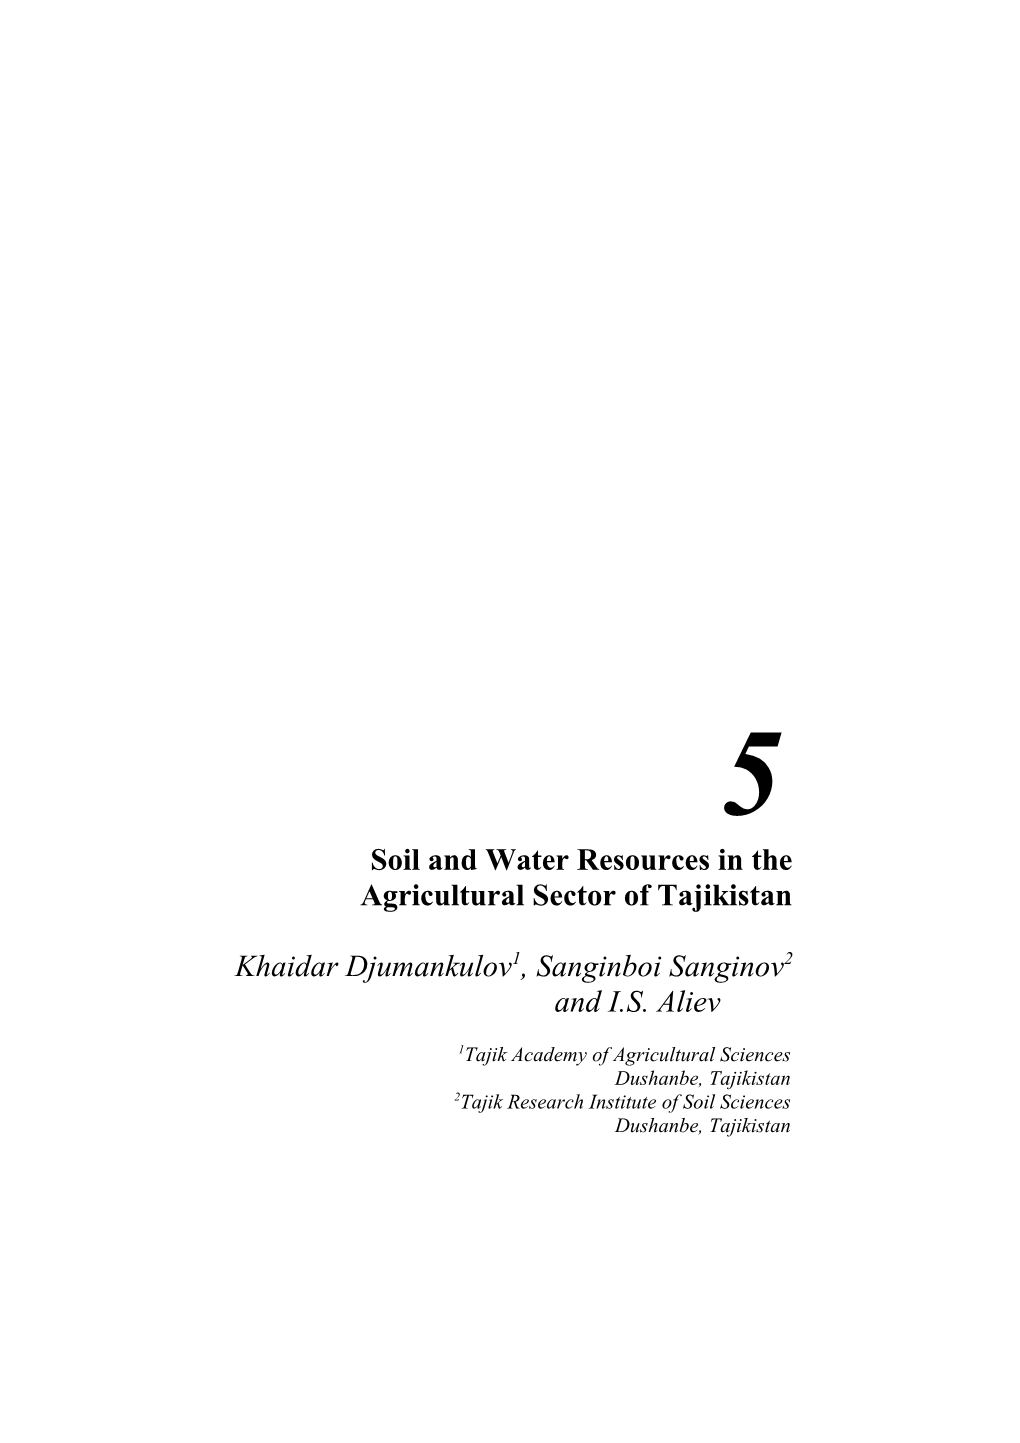 Soil and Water Resources in the Agricultural Sector of Tajikistan